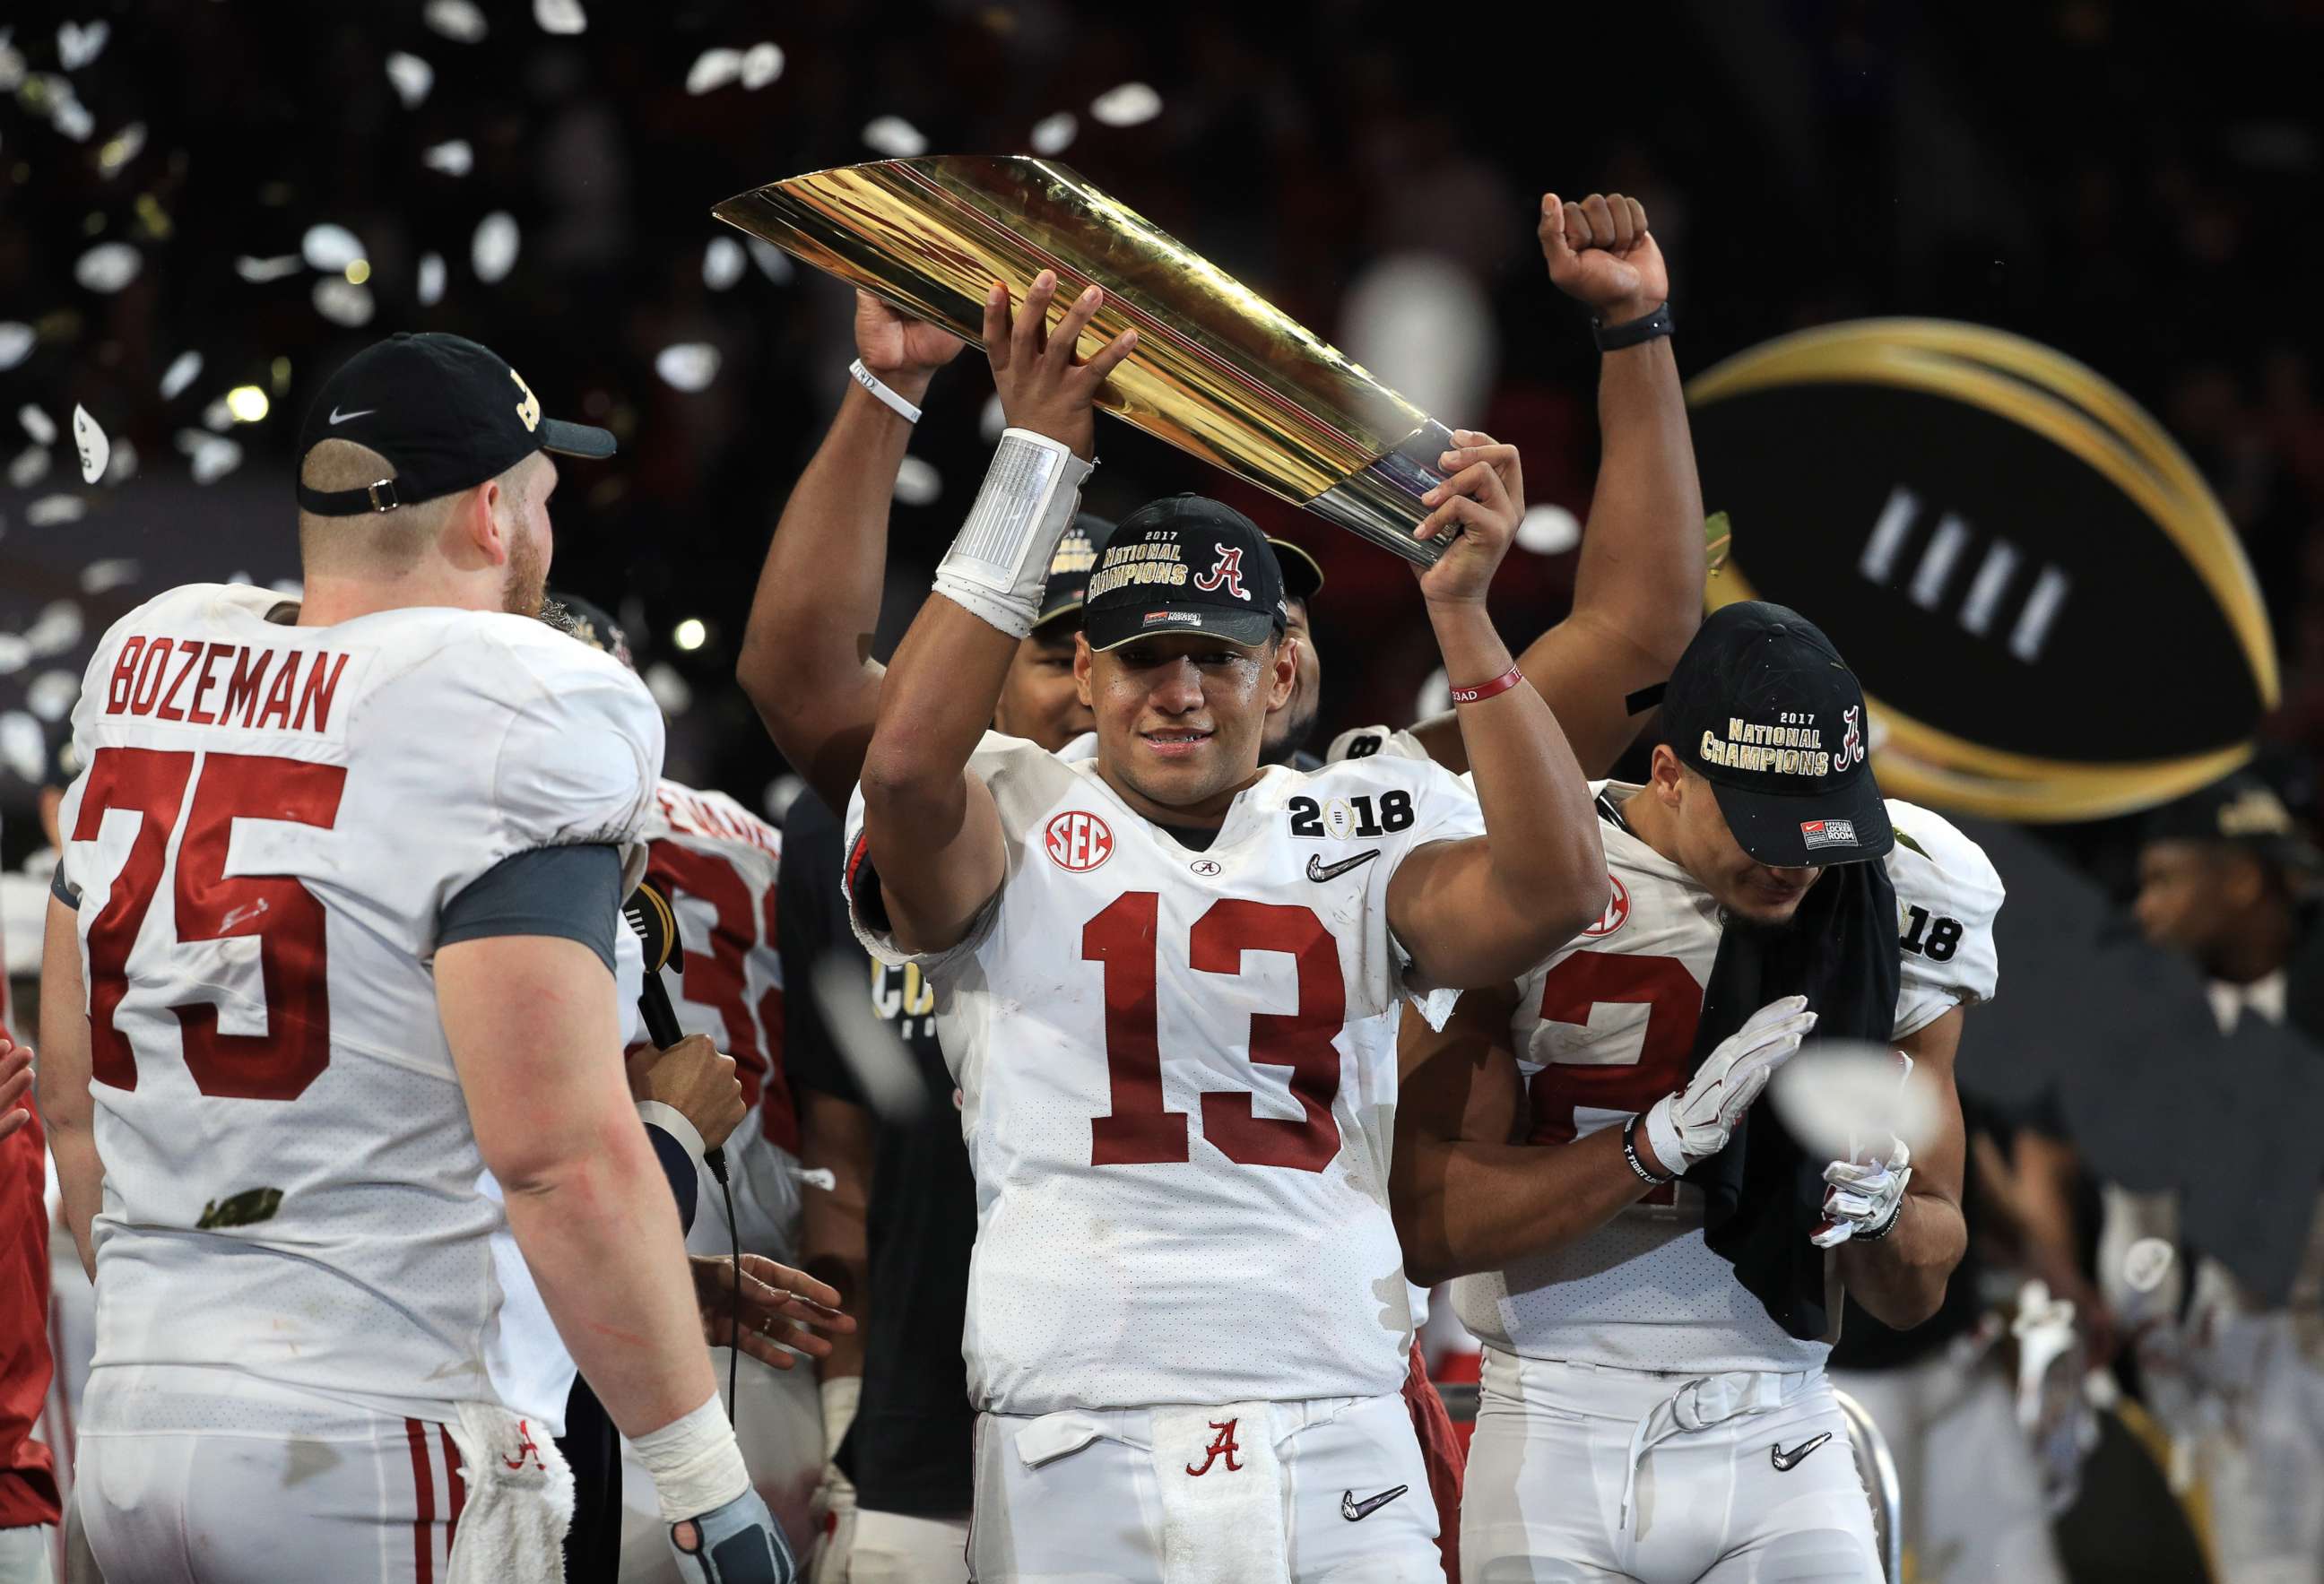 PHOTO: Tua Tagovailoa of the Alabama Crimson Tide holds the trophy while celebrating with his team after defeating the Georgia Bulldogs in overtime to win the CFP National Championship presented by AT&T at Mercedes-Benz Stadium, Jan. 8, 2018, in Atlanta.